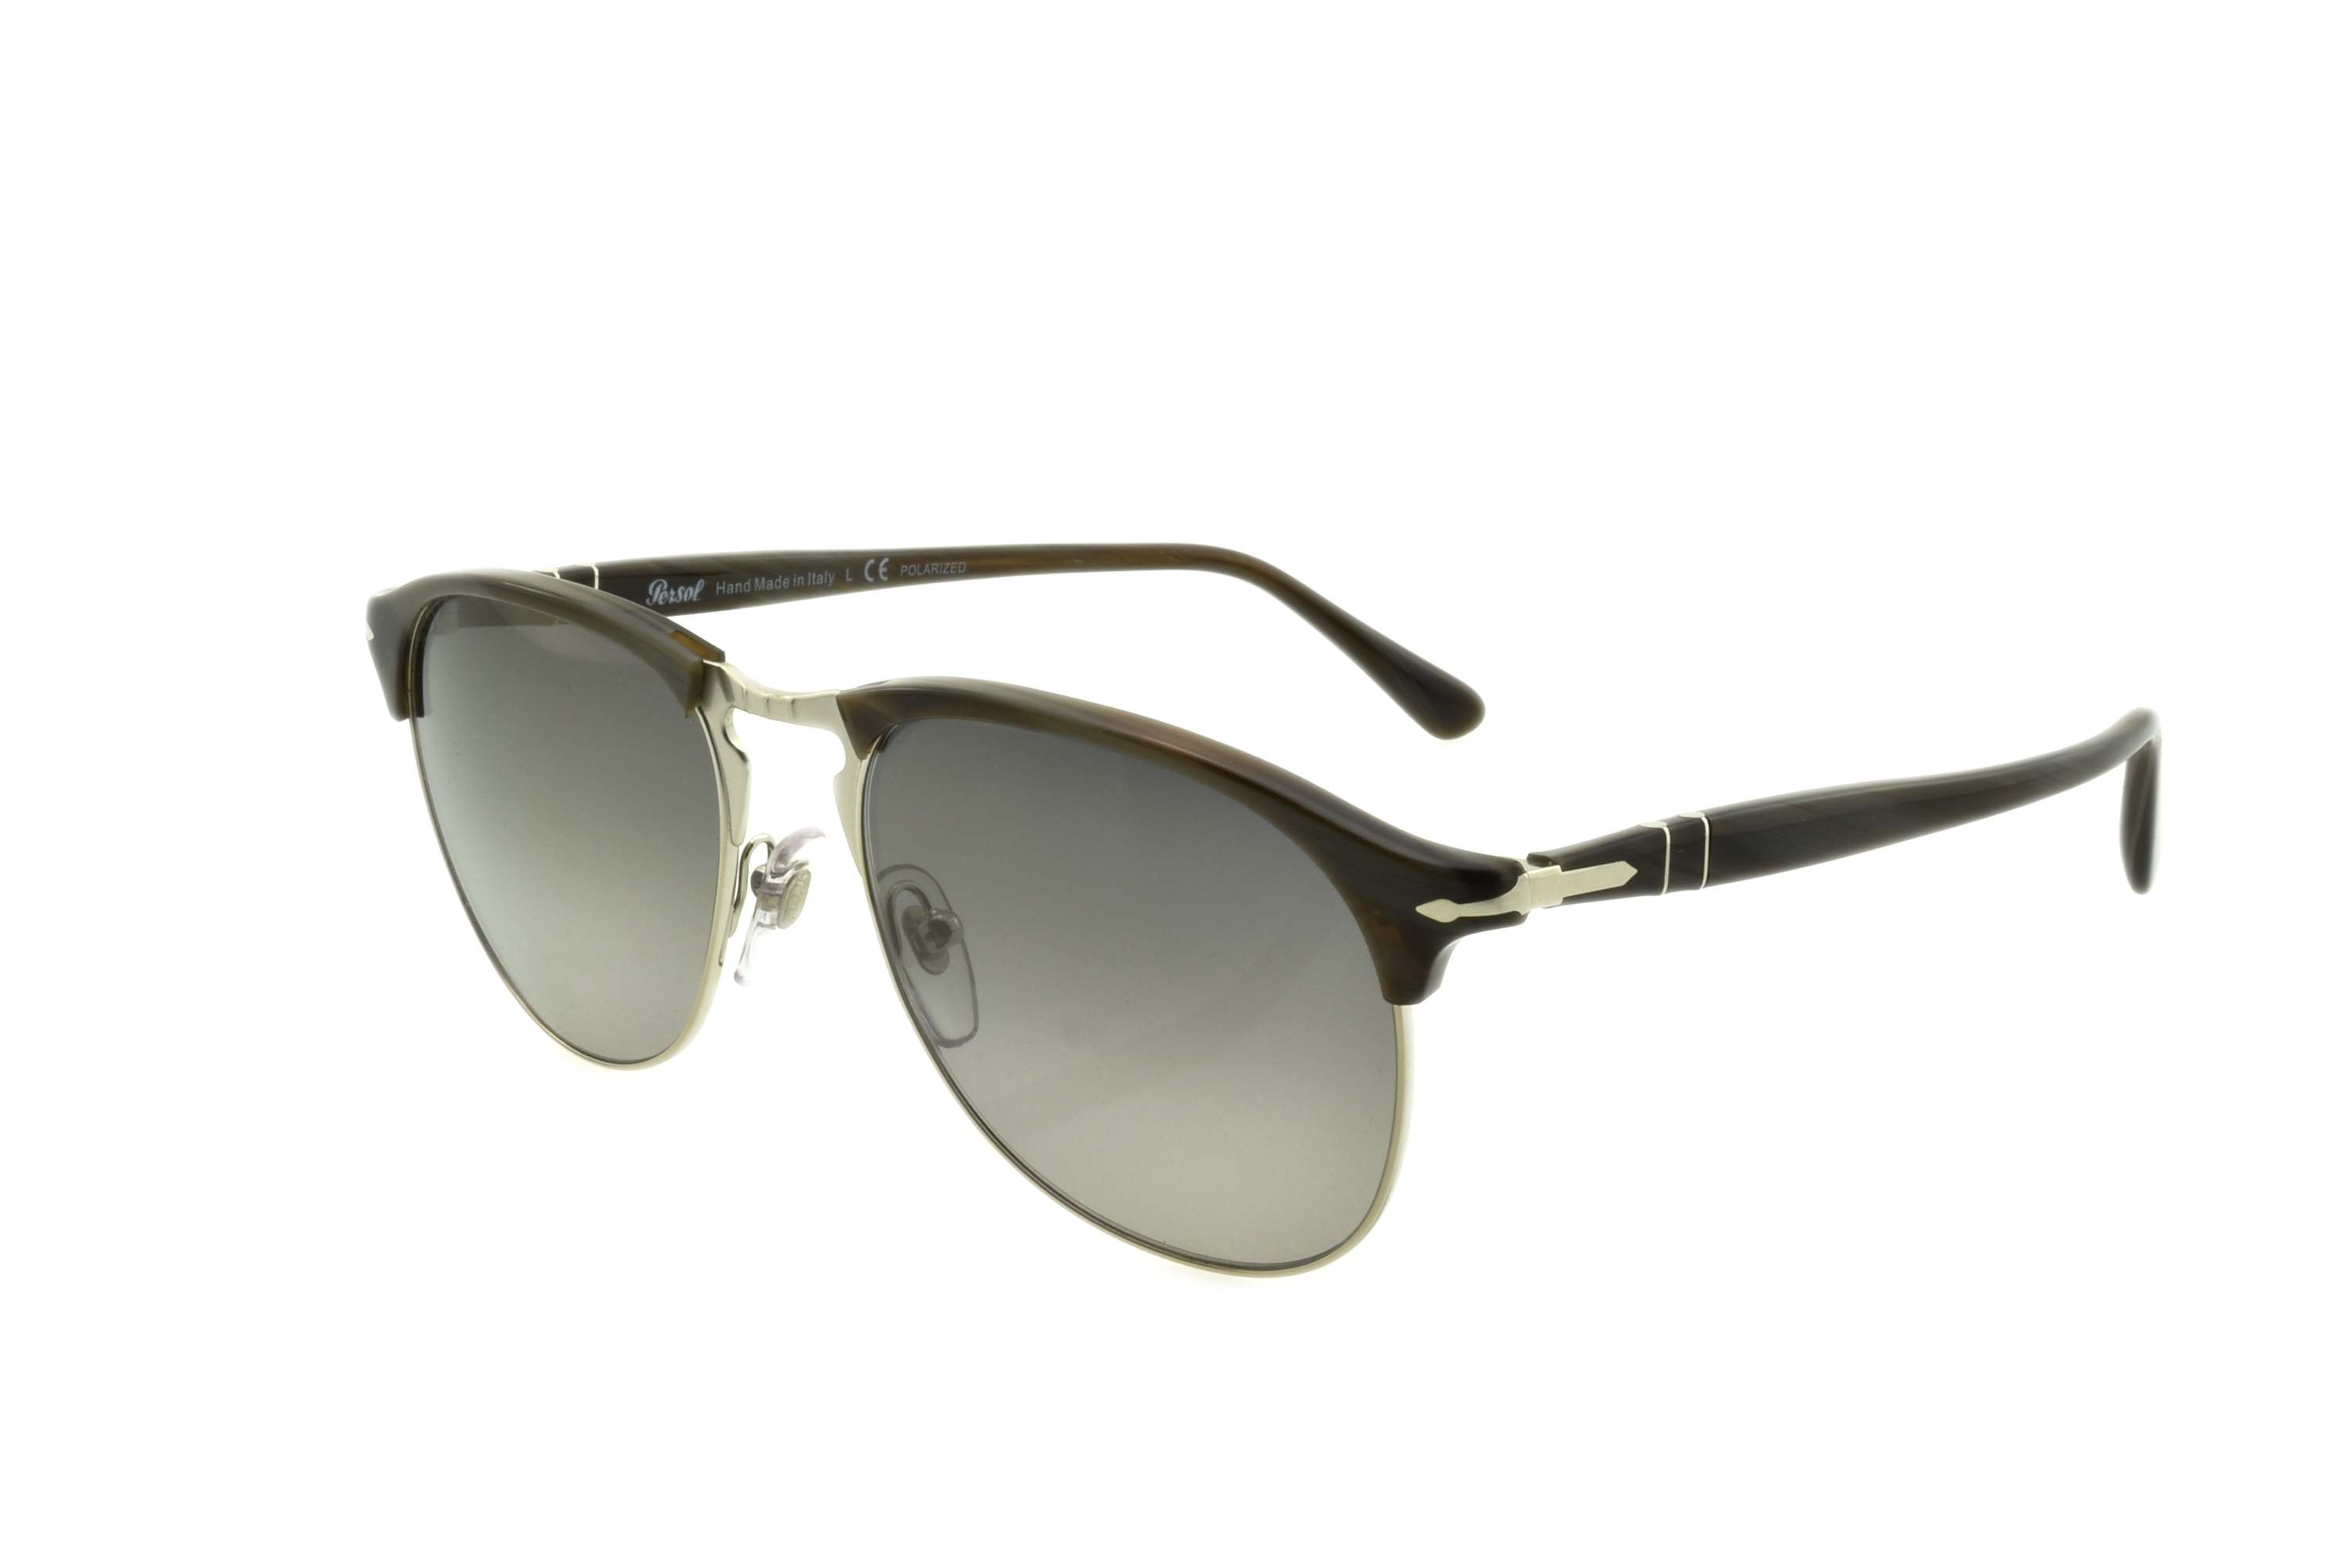 Persol 8649S